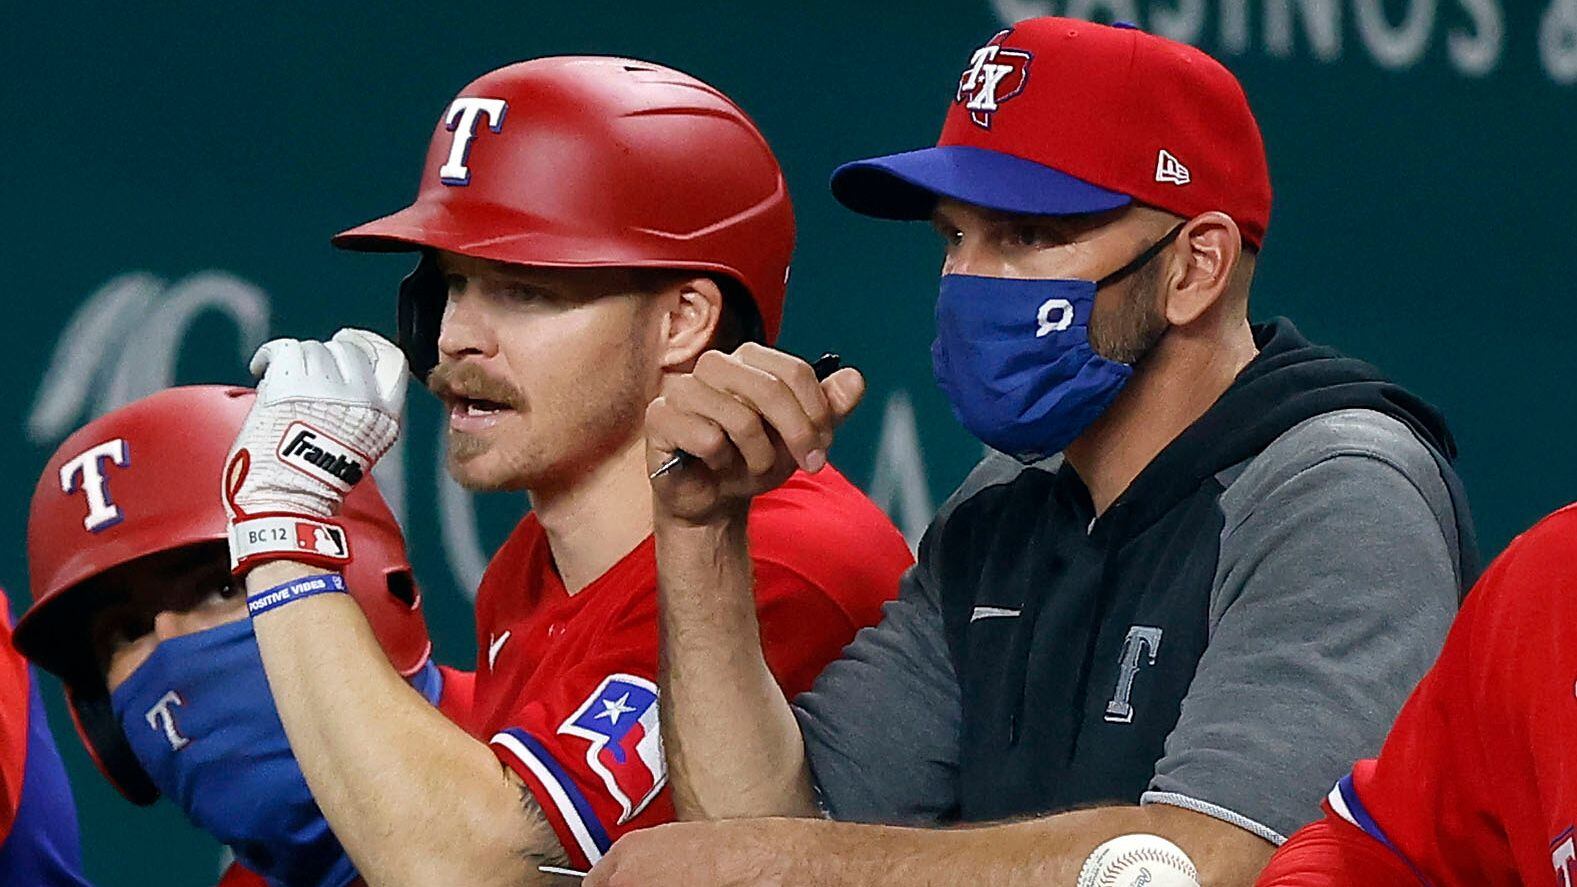 Texas Rangers third baseman Brock Holt (16) visits with manager Chris Wooward before his at-bat during the sixth inning at Globe Life Field in Arlington, Texas, Friday, April 30, 2021. The Rangers were facing the Boston Red Sox. (Tom Fox/The Dallas Morning News)